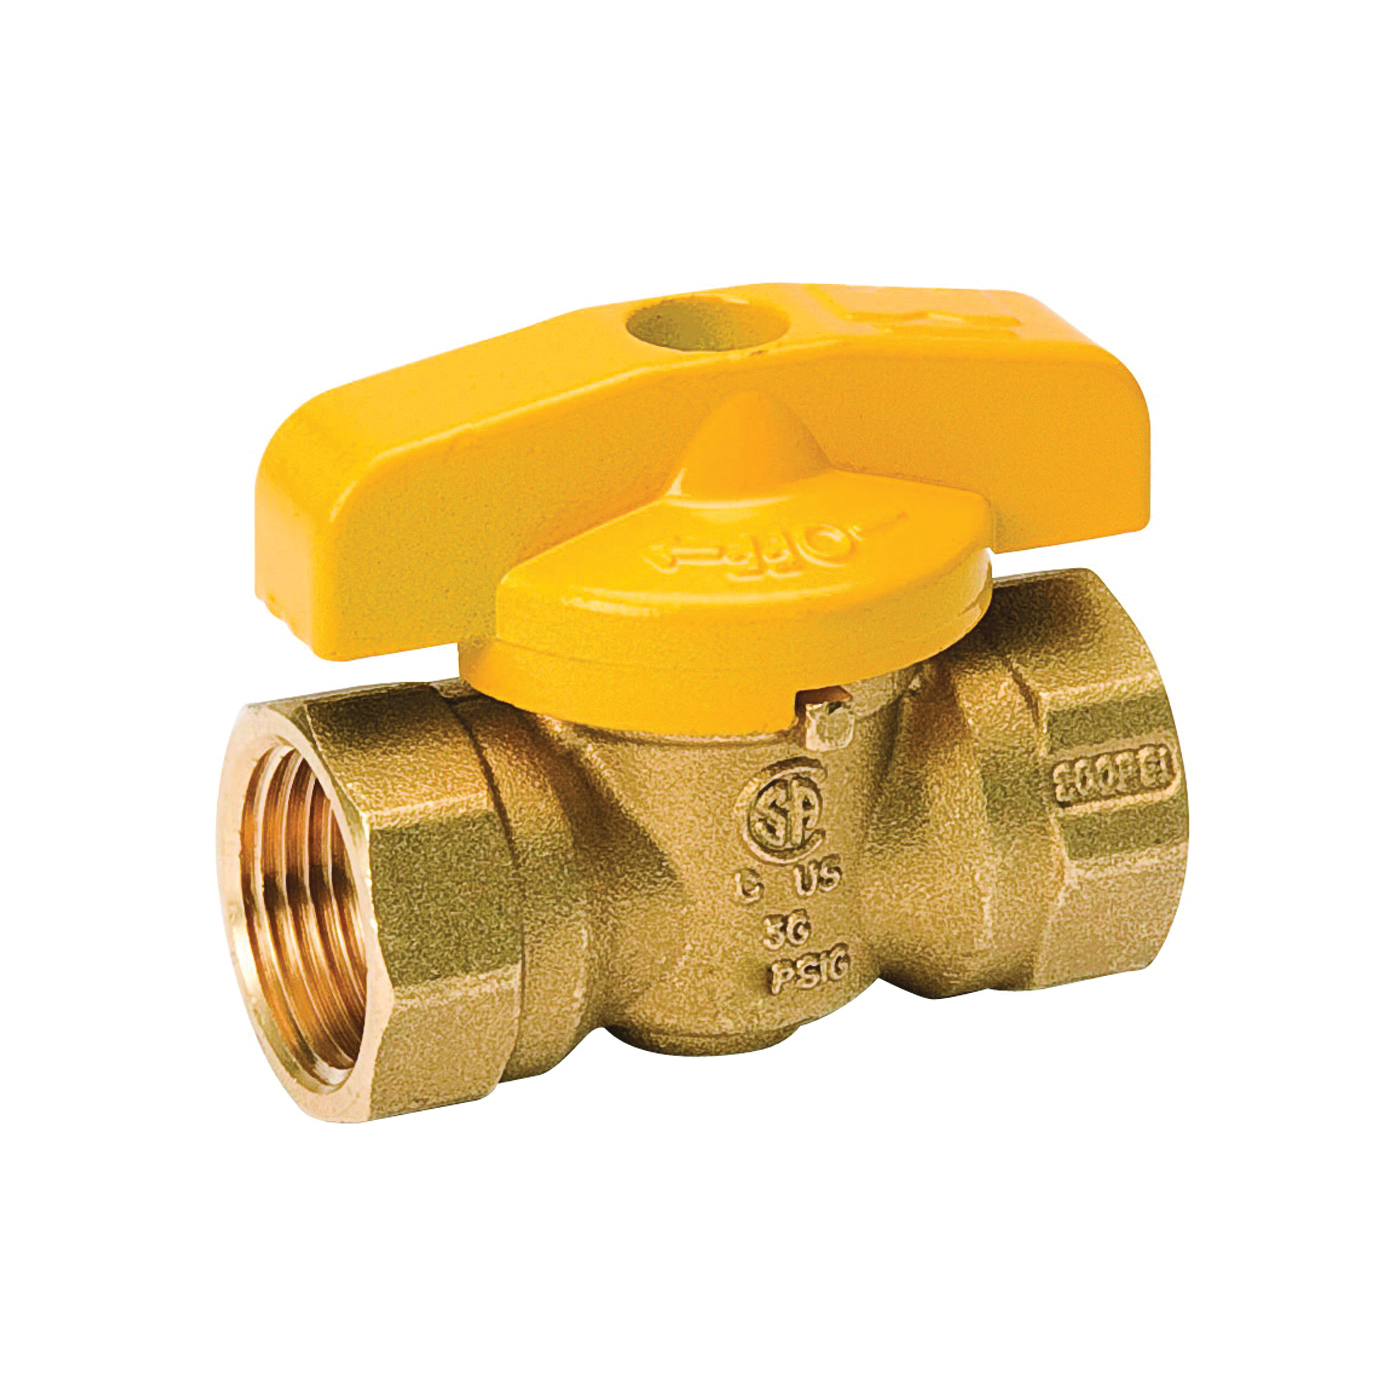 ProLine Series 210-524RP Gas Ball Valve, 3/4 in Connection, FPT, 200 psi Pressure, Manual Actuator, Brass Body